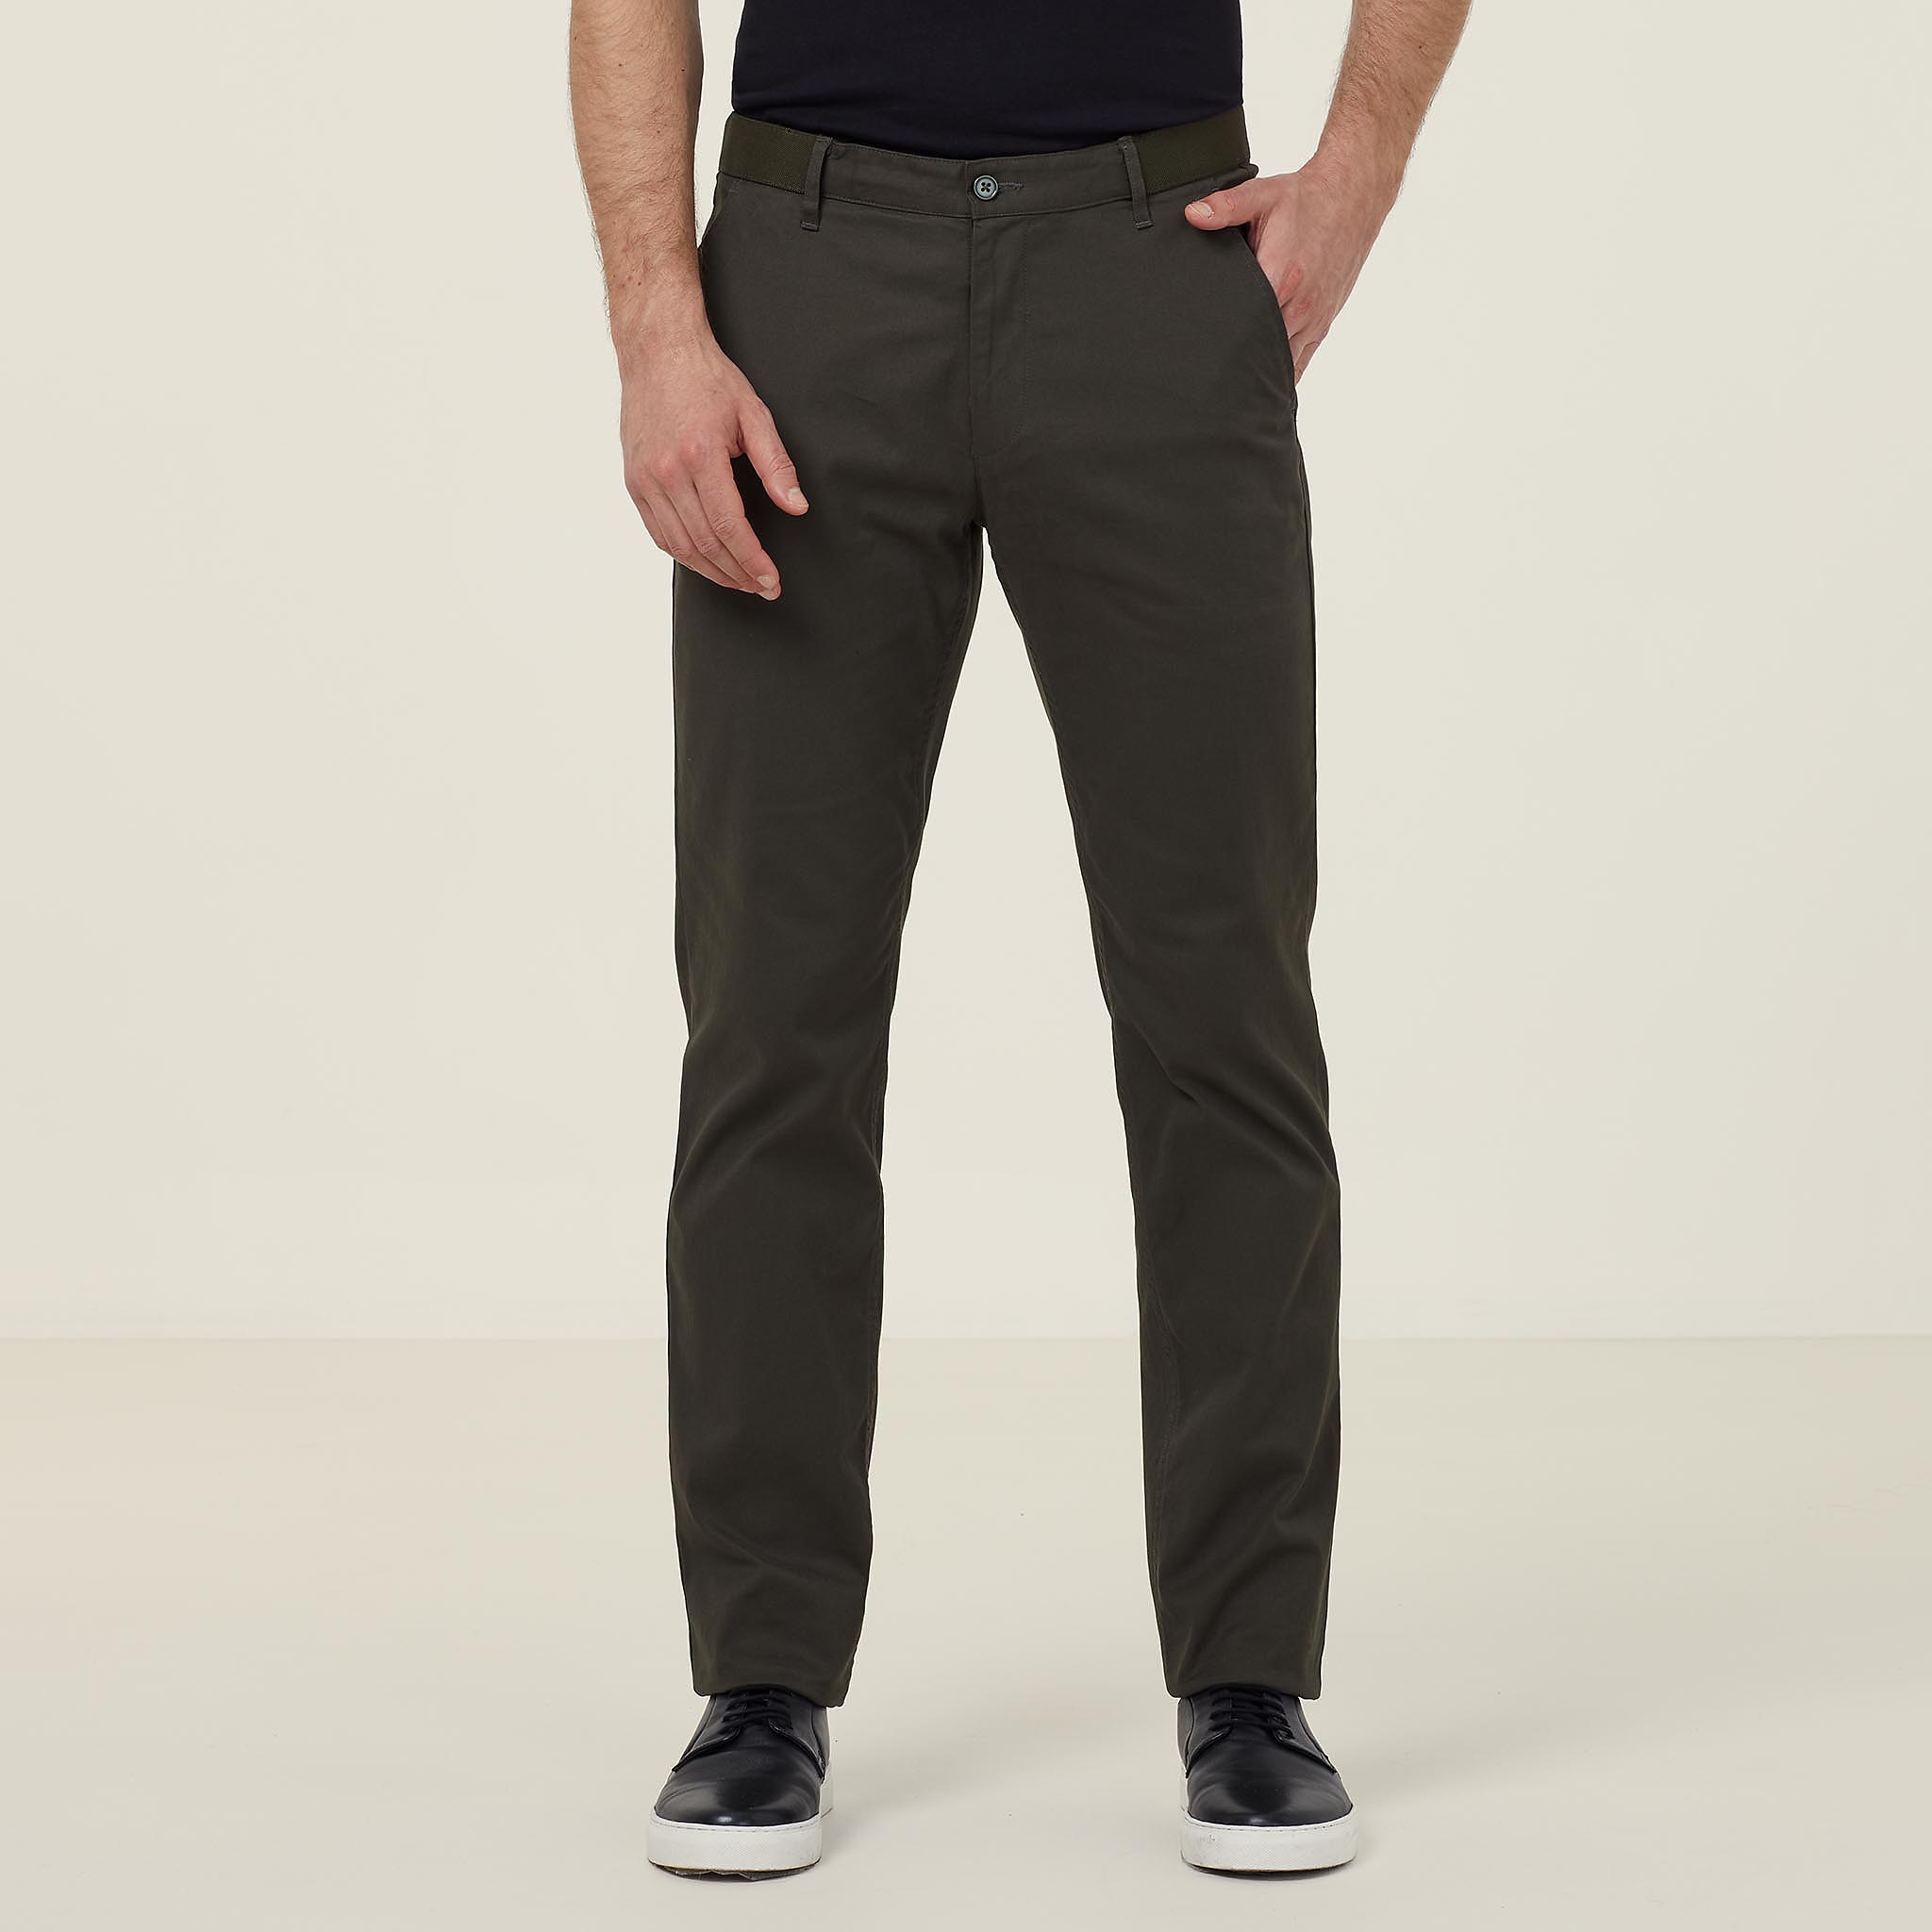 TAILORED CHINO PANT-MALE FIT, beige | NNT Uniforms